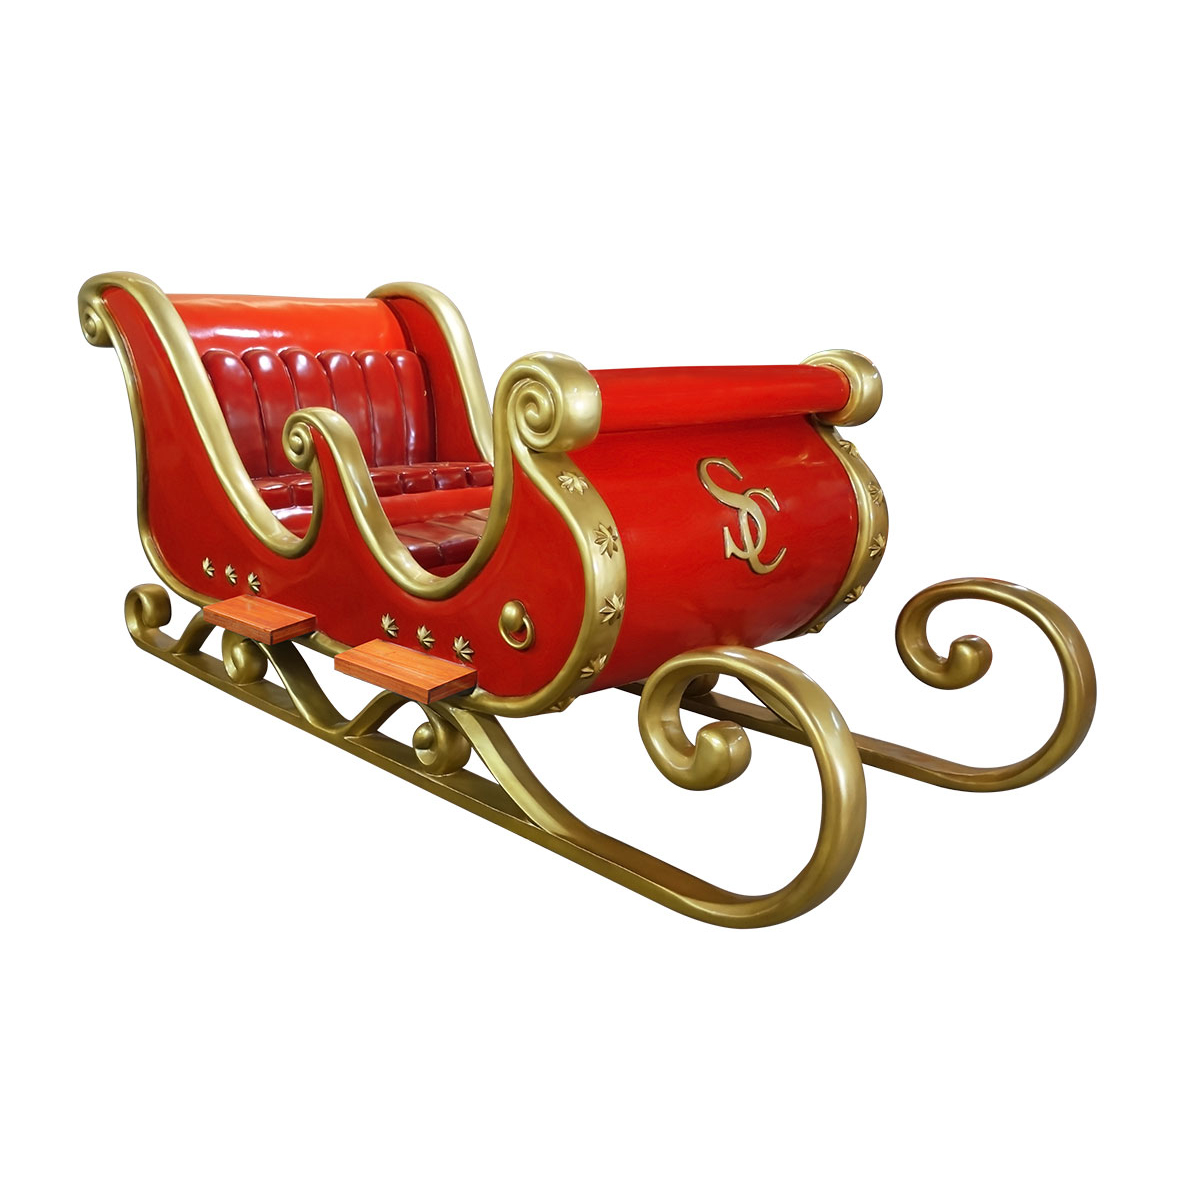 Santa Sleigh - Family Sized, Red/Gold